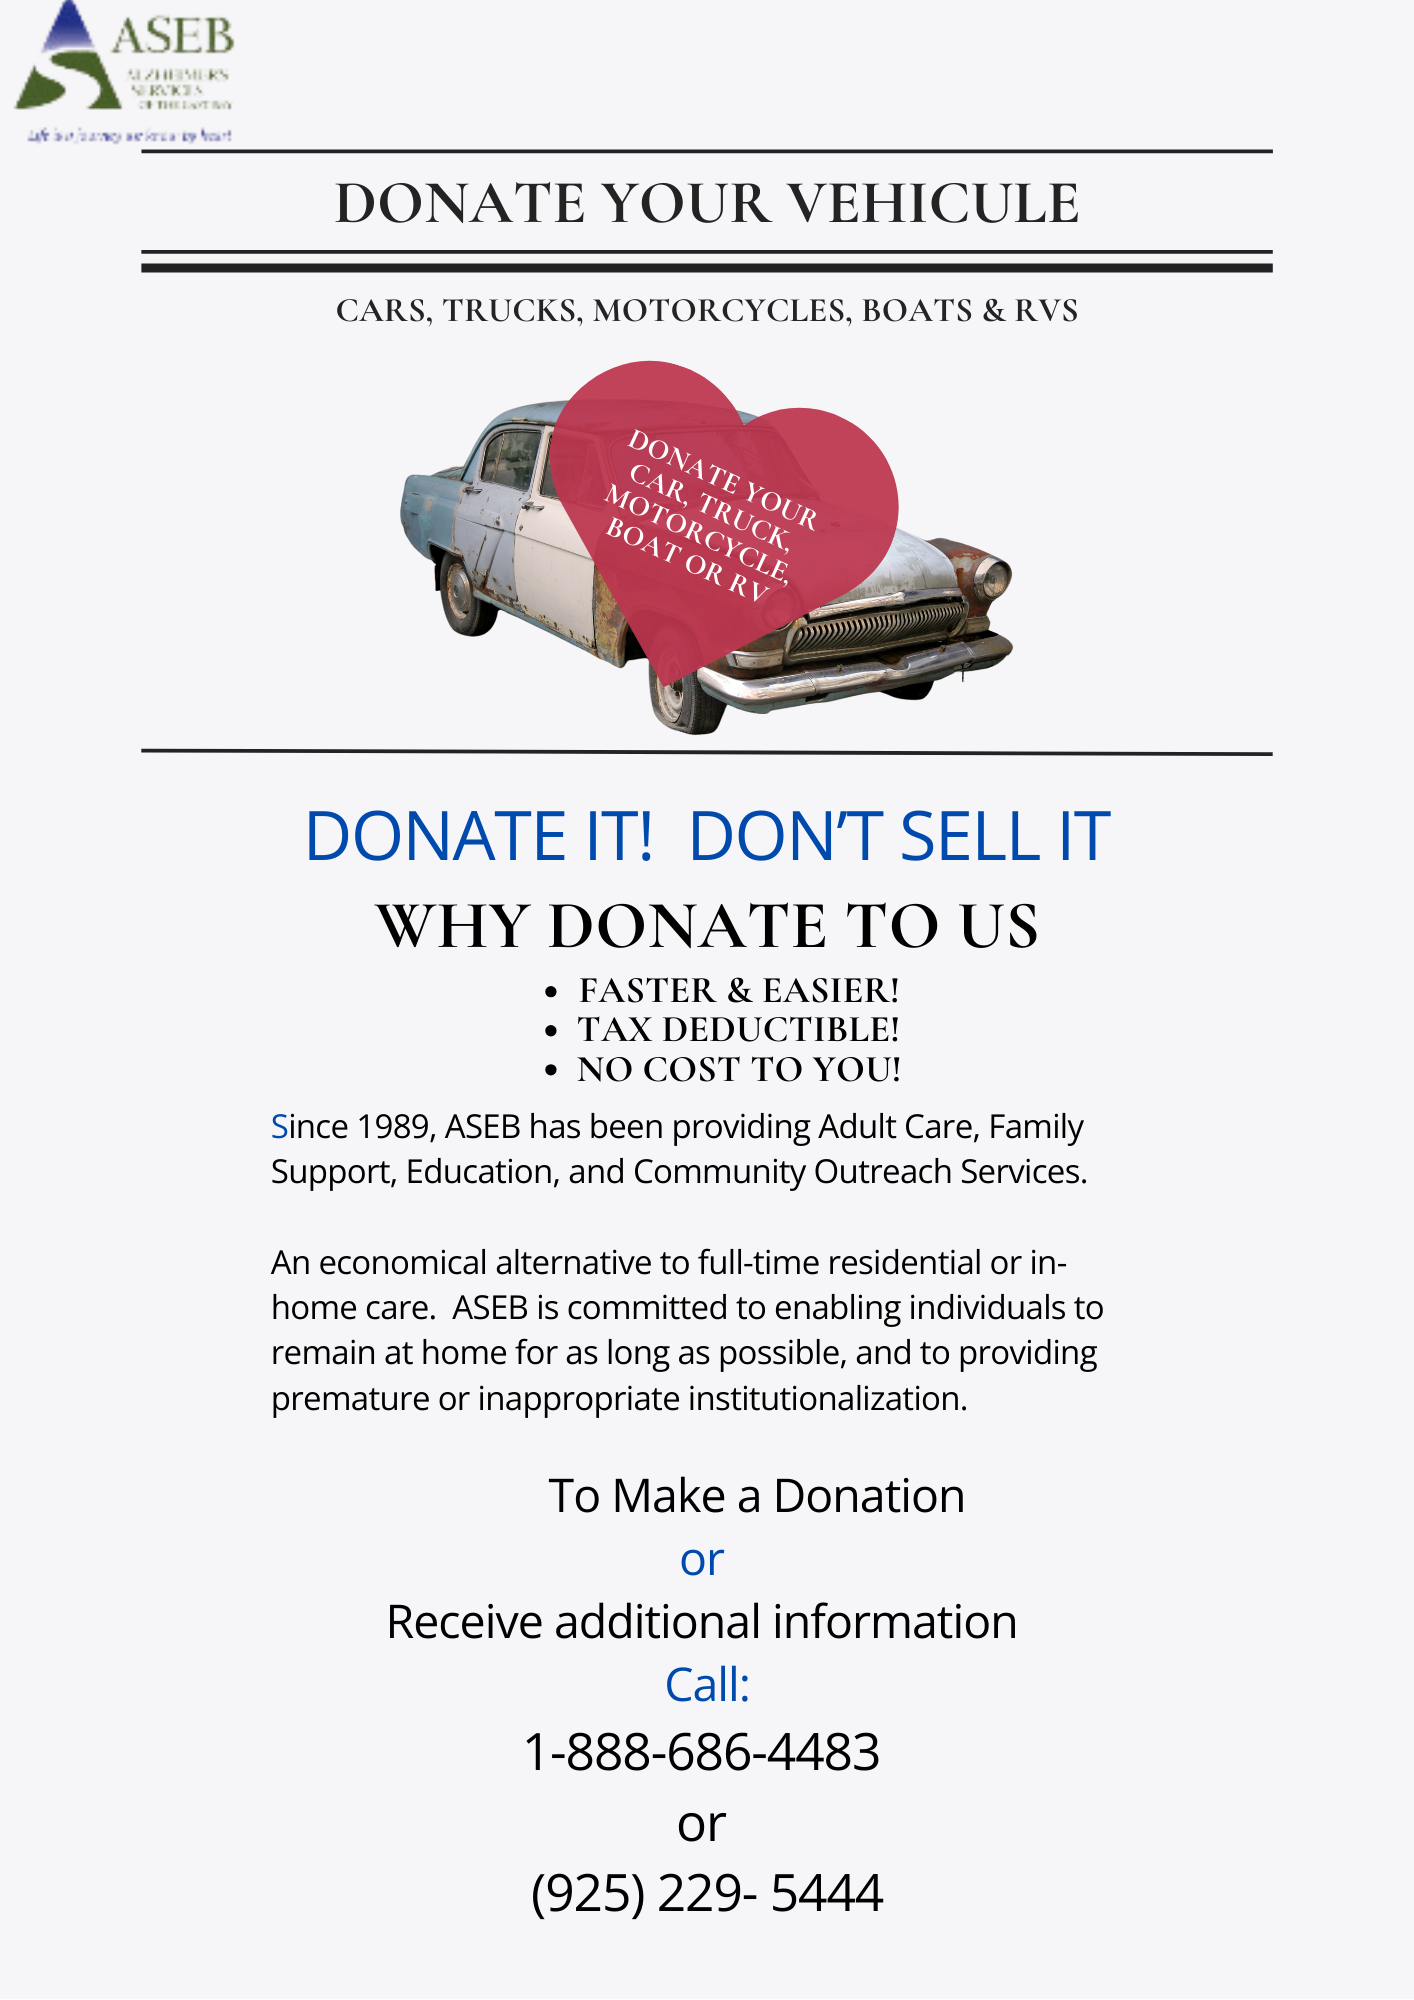 DONATE YOUR VEHICLE